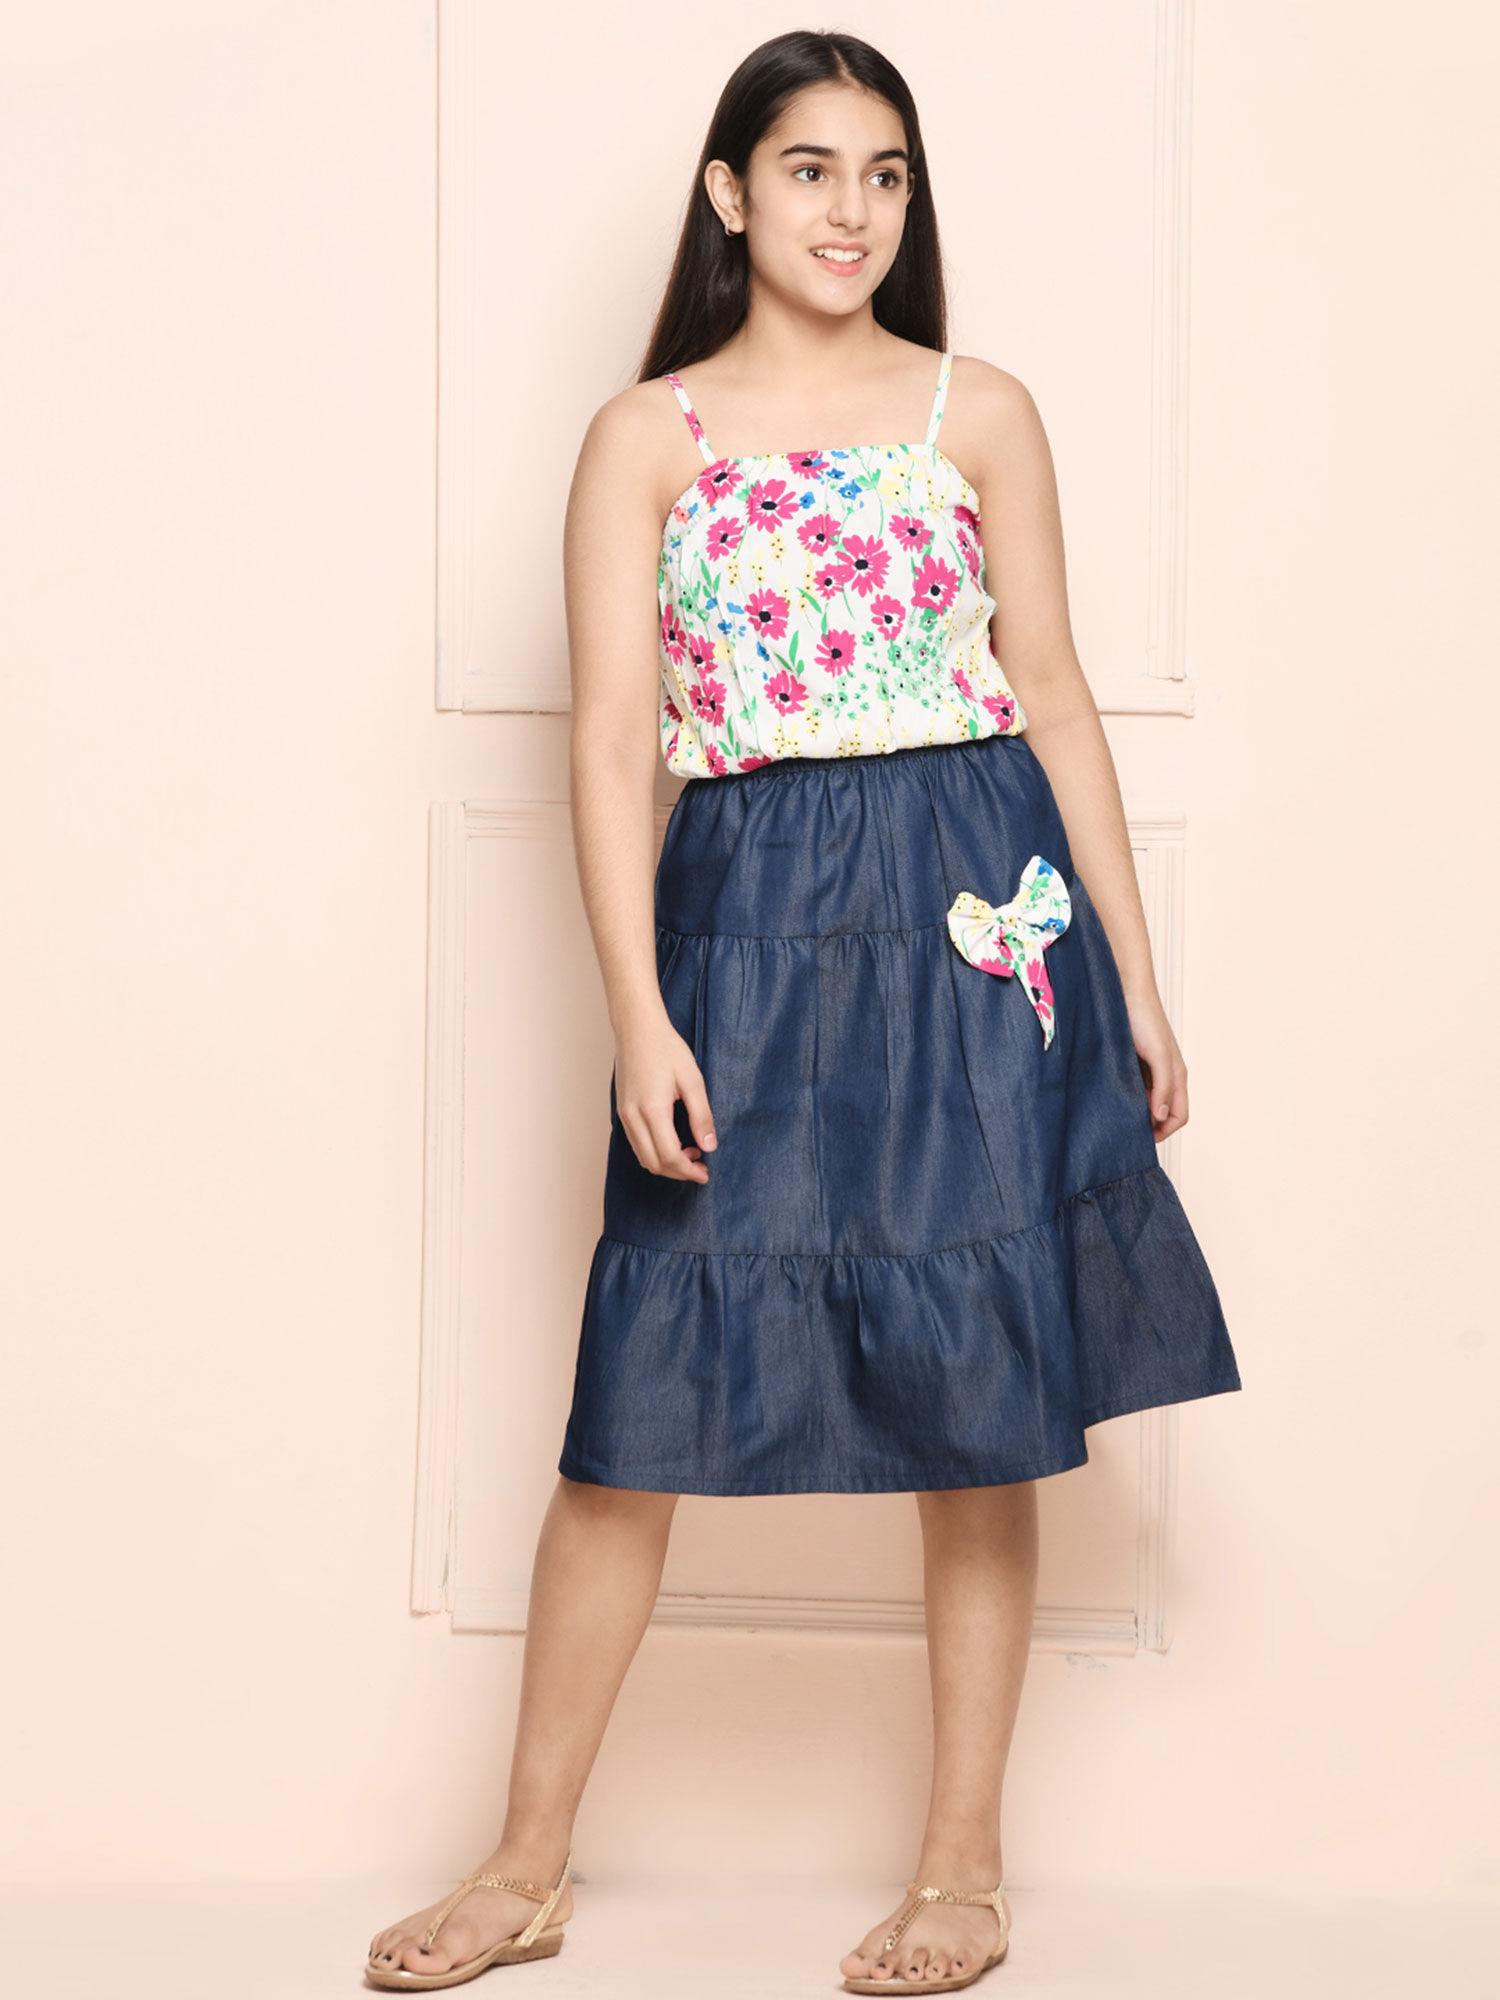 strappy floral top with tiered denim skirt set